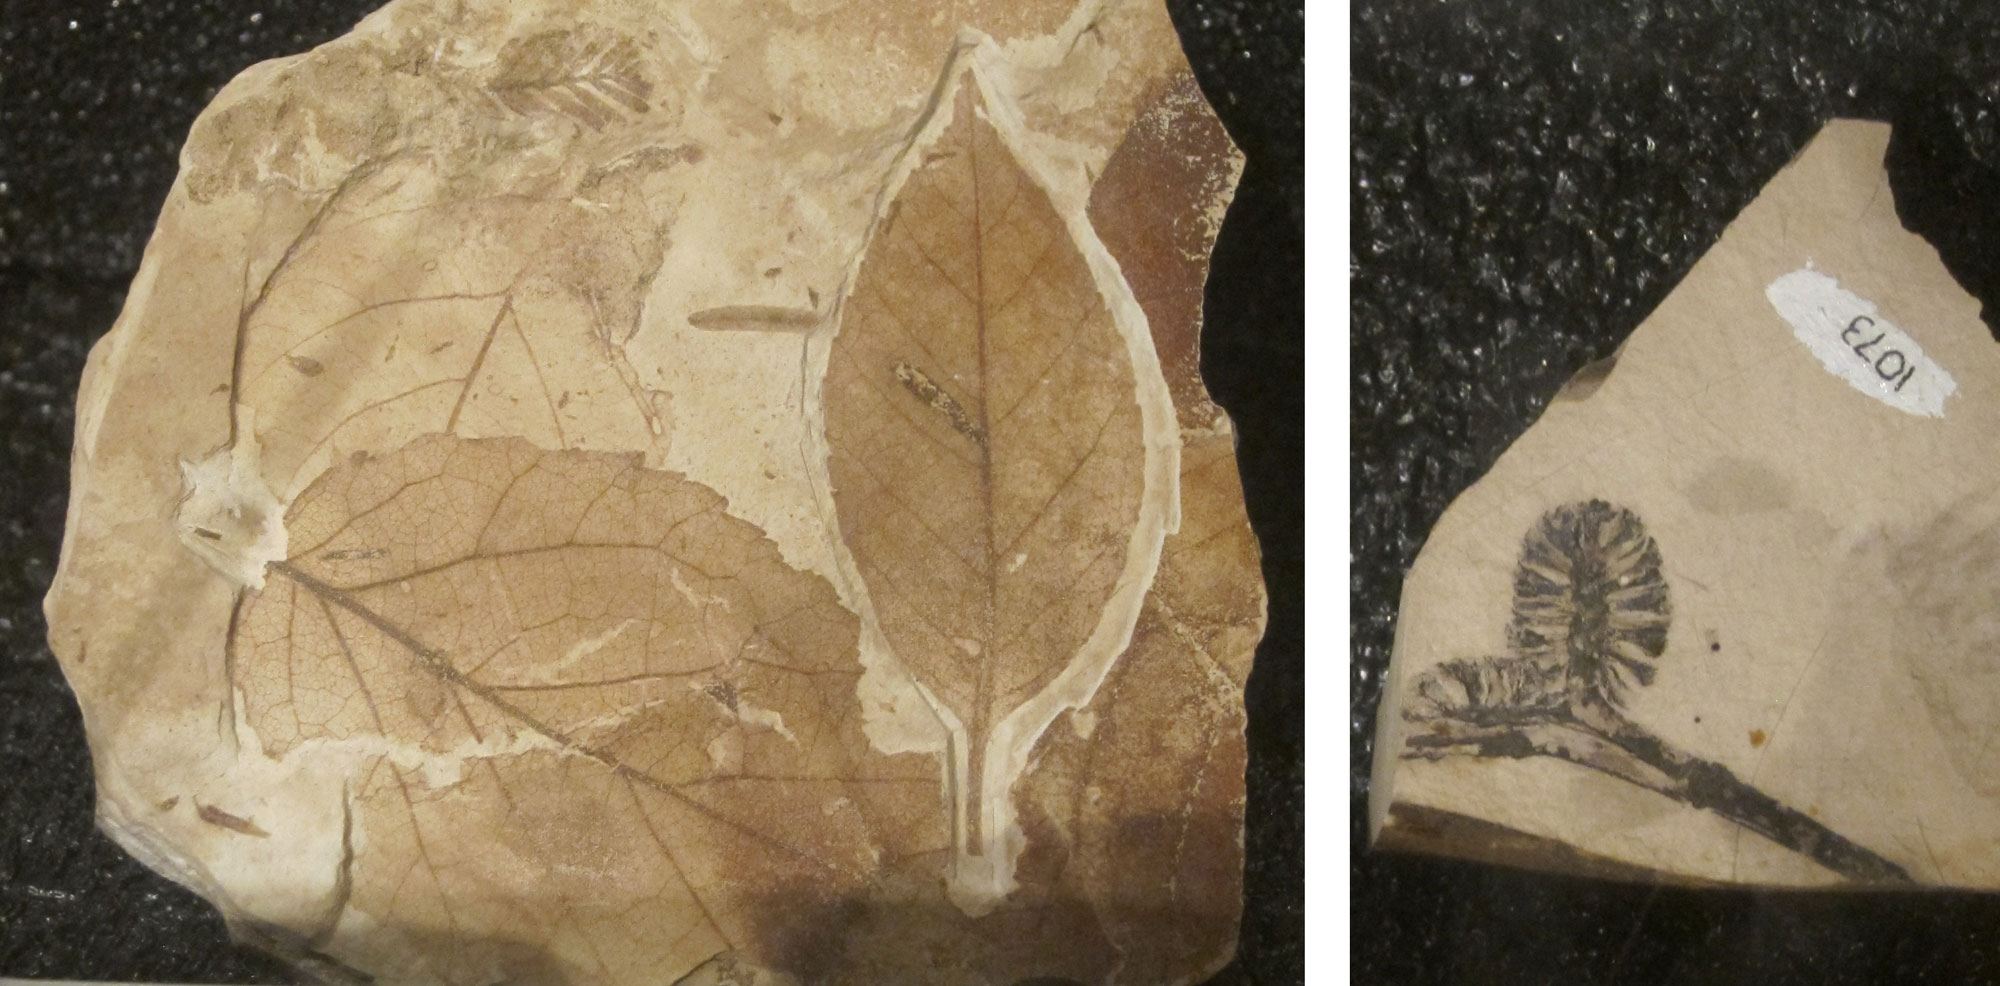 2-panel figure showing photos fossils of alder form the Oligocene John Day Formation. Panel 1: Alder leaves. The leaves are simple with pinnate venation and a toothed margin. Panel 2: A branch with two so-called cones, really clusters of female flowers or fruits.